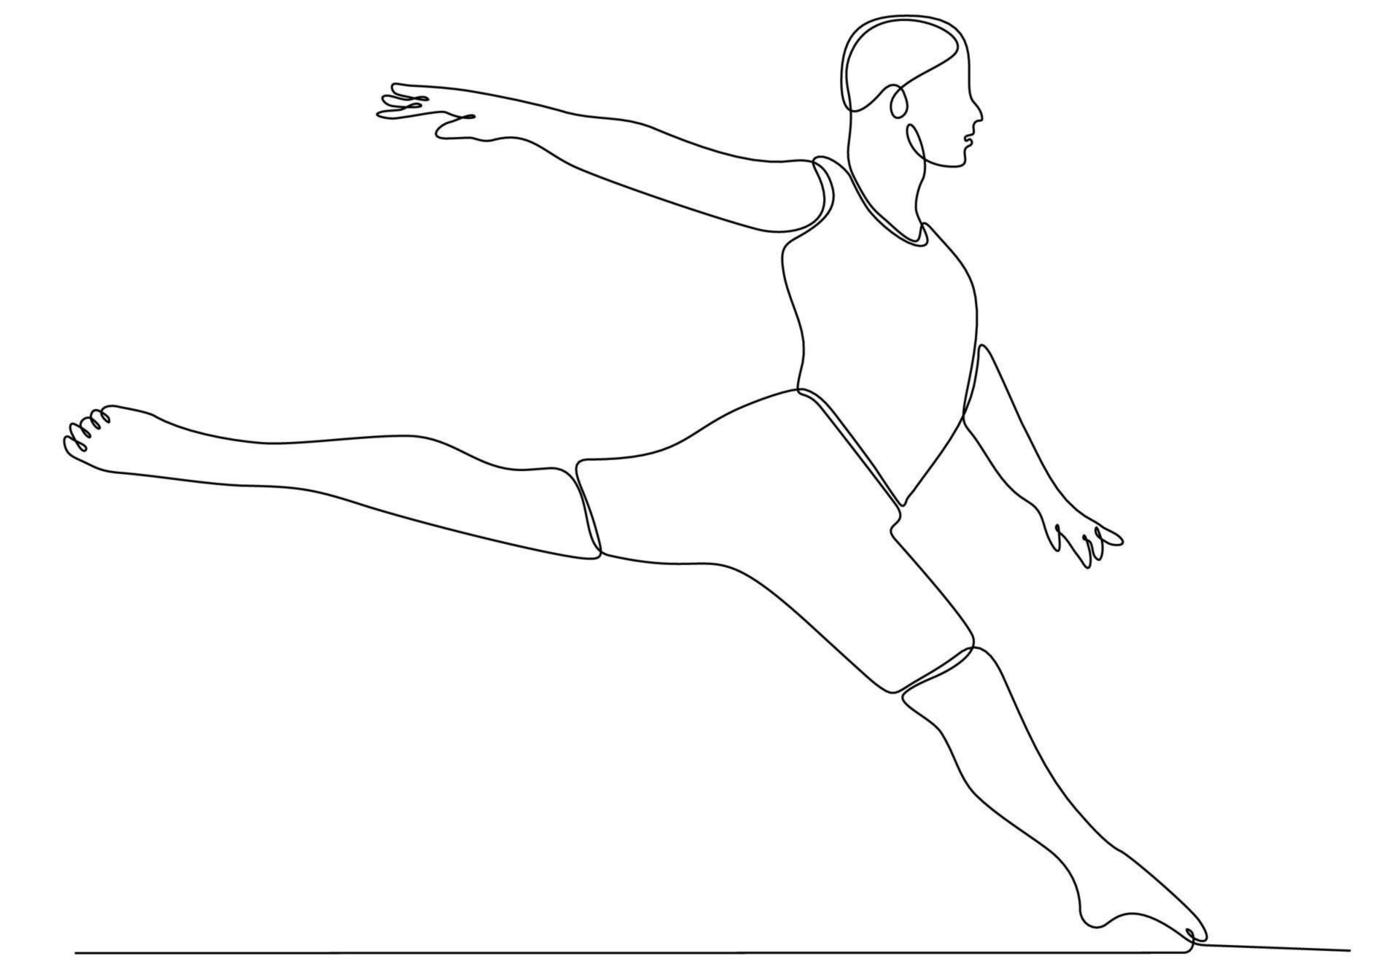 Continuous line drawing. Illustration showing a ballerina in motion. Art. Ballet. Vector illustration